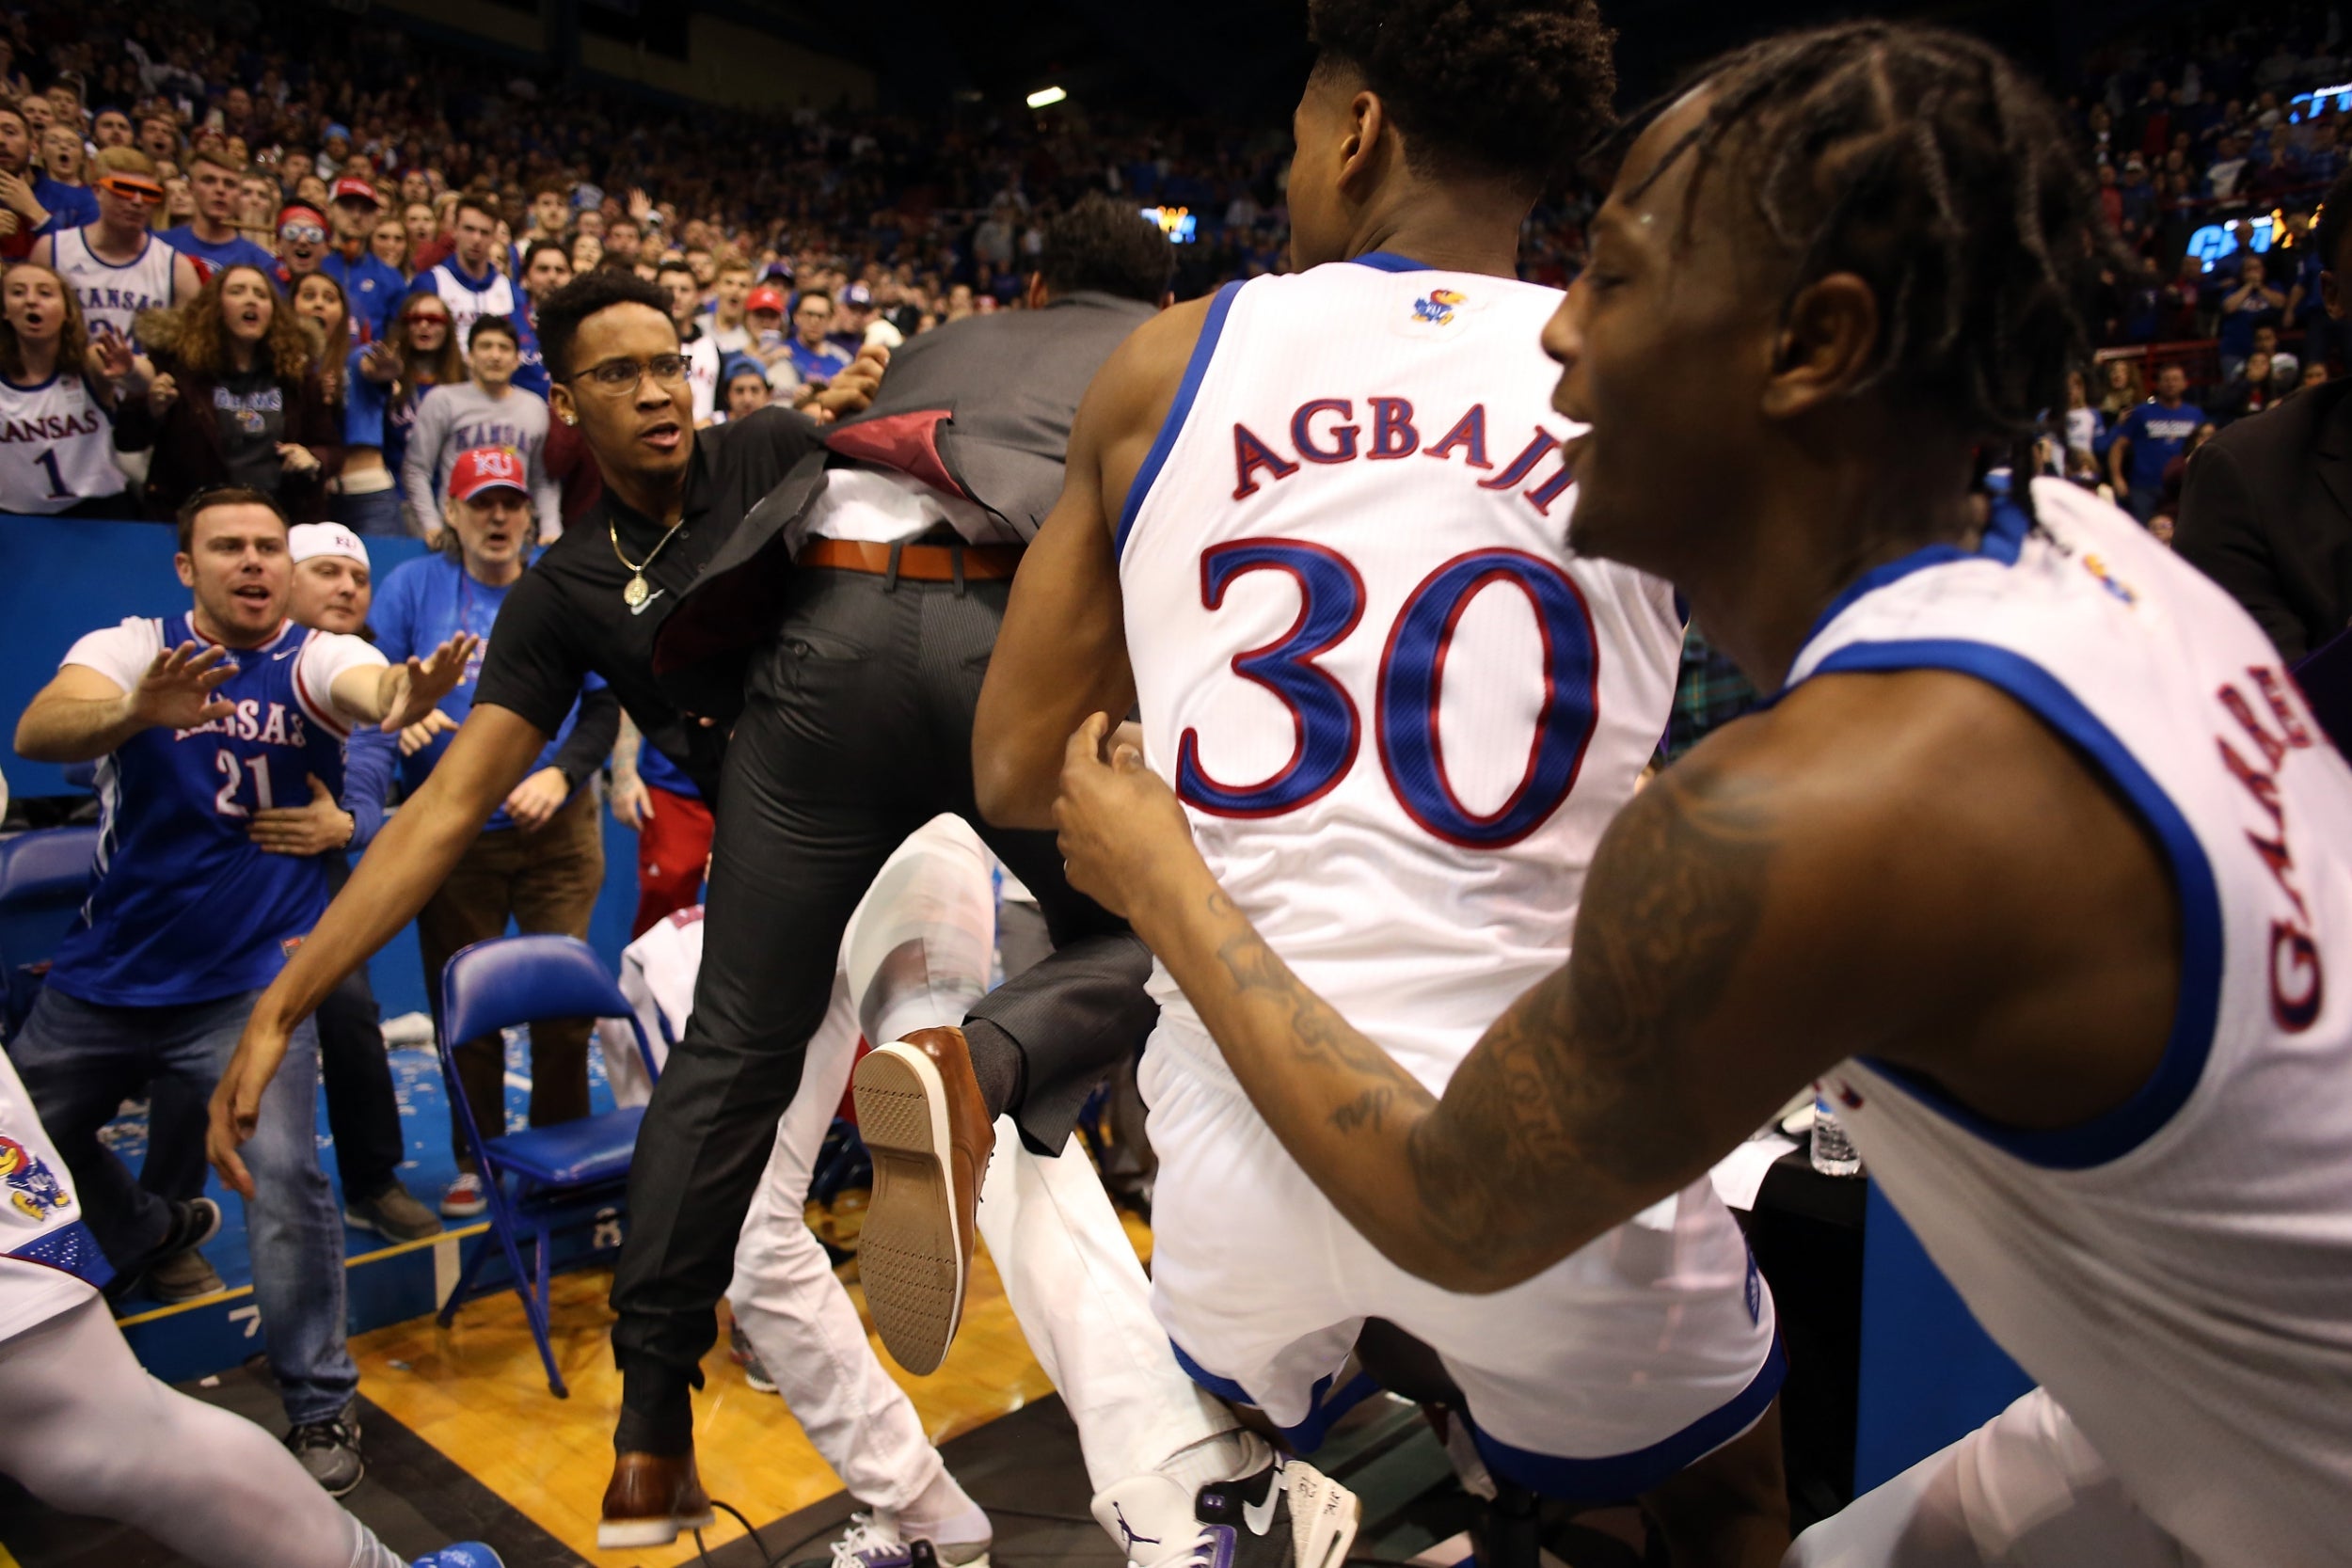 Players from the Kansas State Wildcats and the Kansas Jayhawks brawl during a game at the Allen Fieldhouse in Lawrence, Kansas